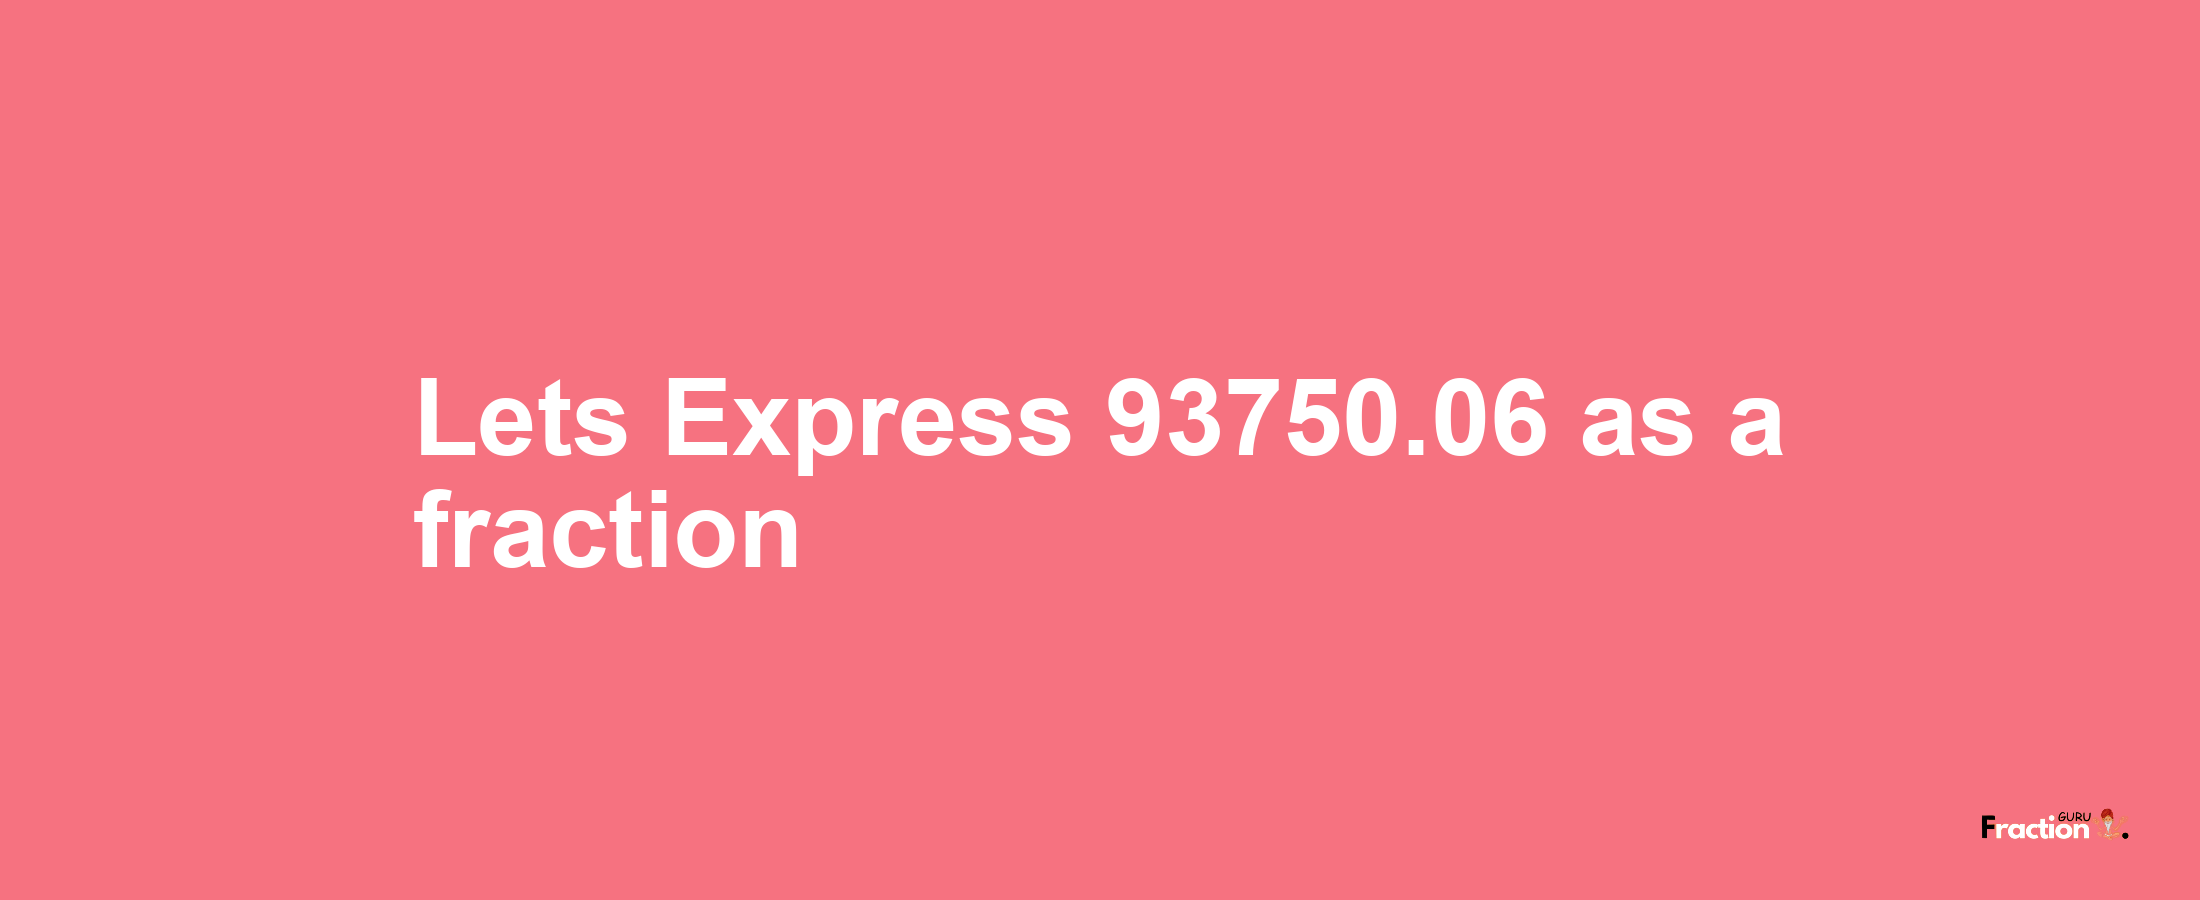 Lets Express 93750.06 as afraction